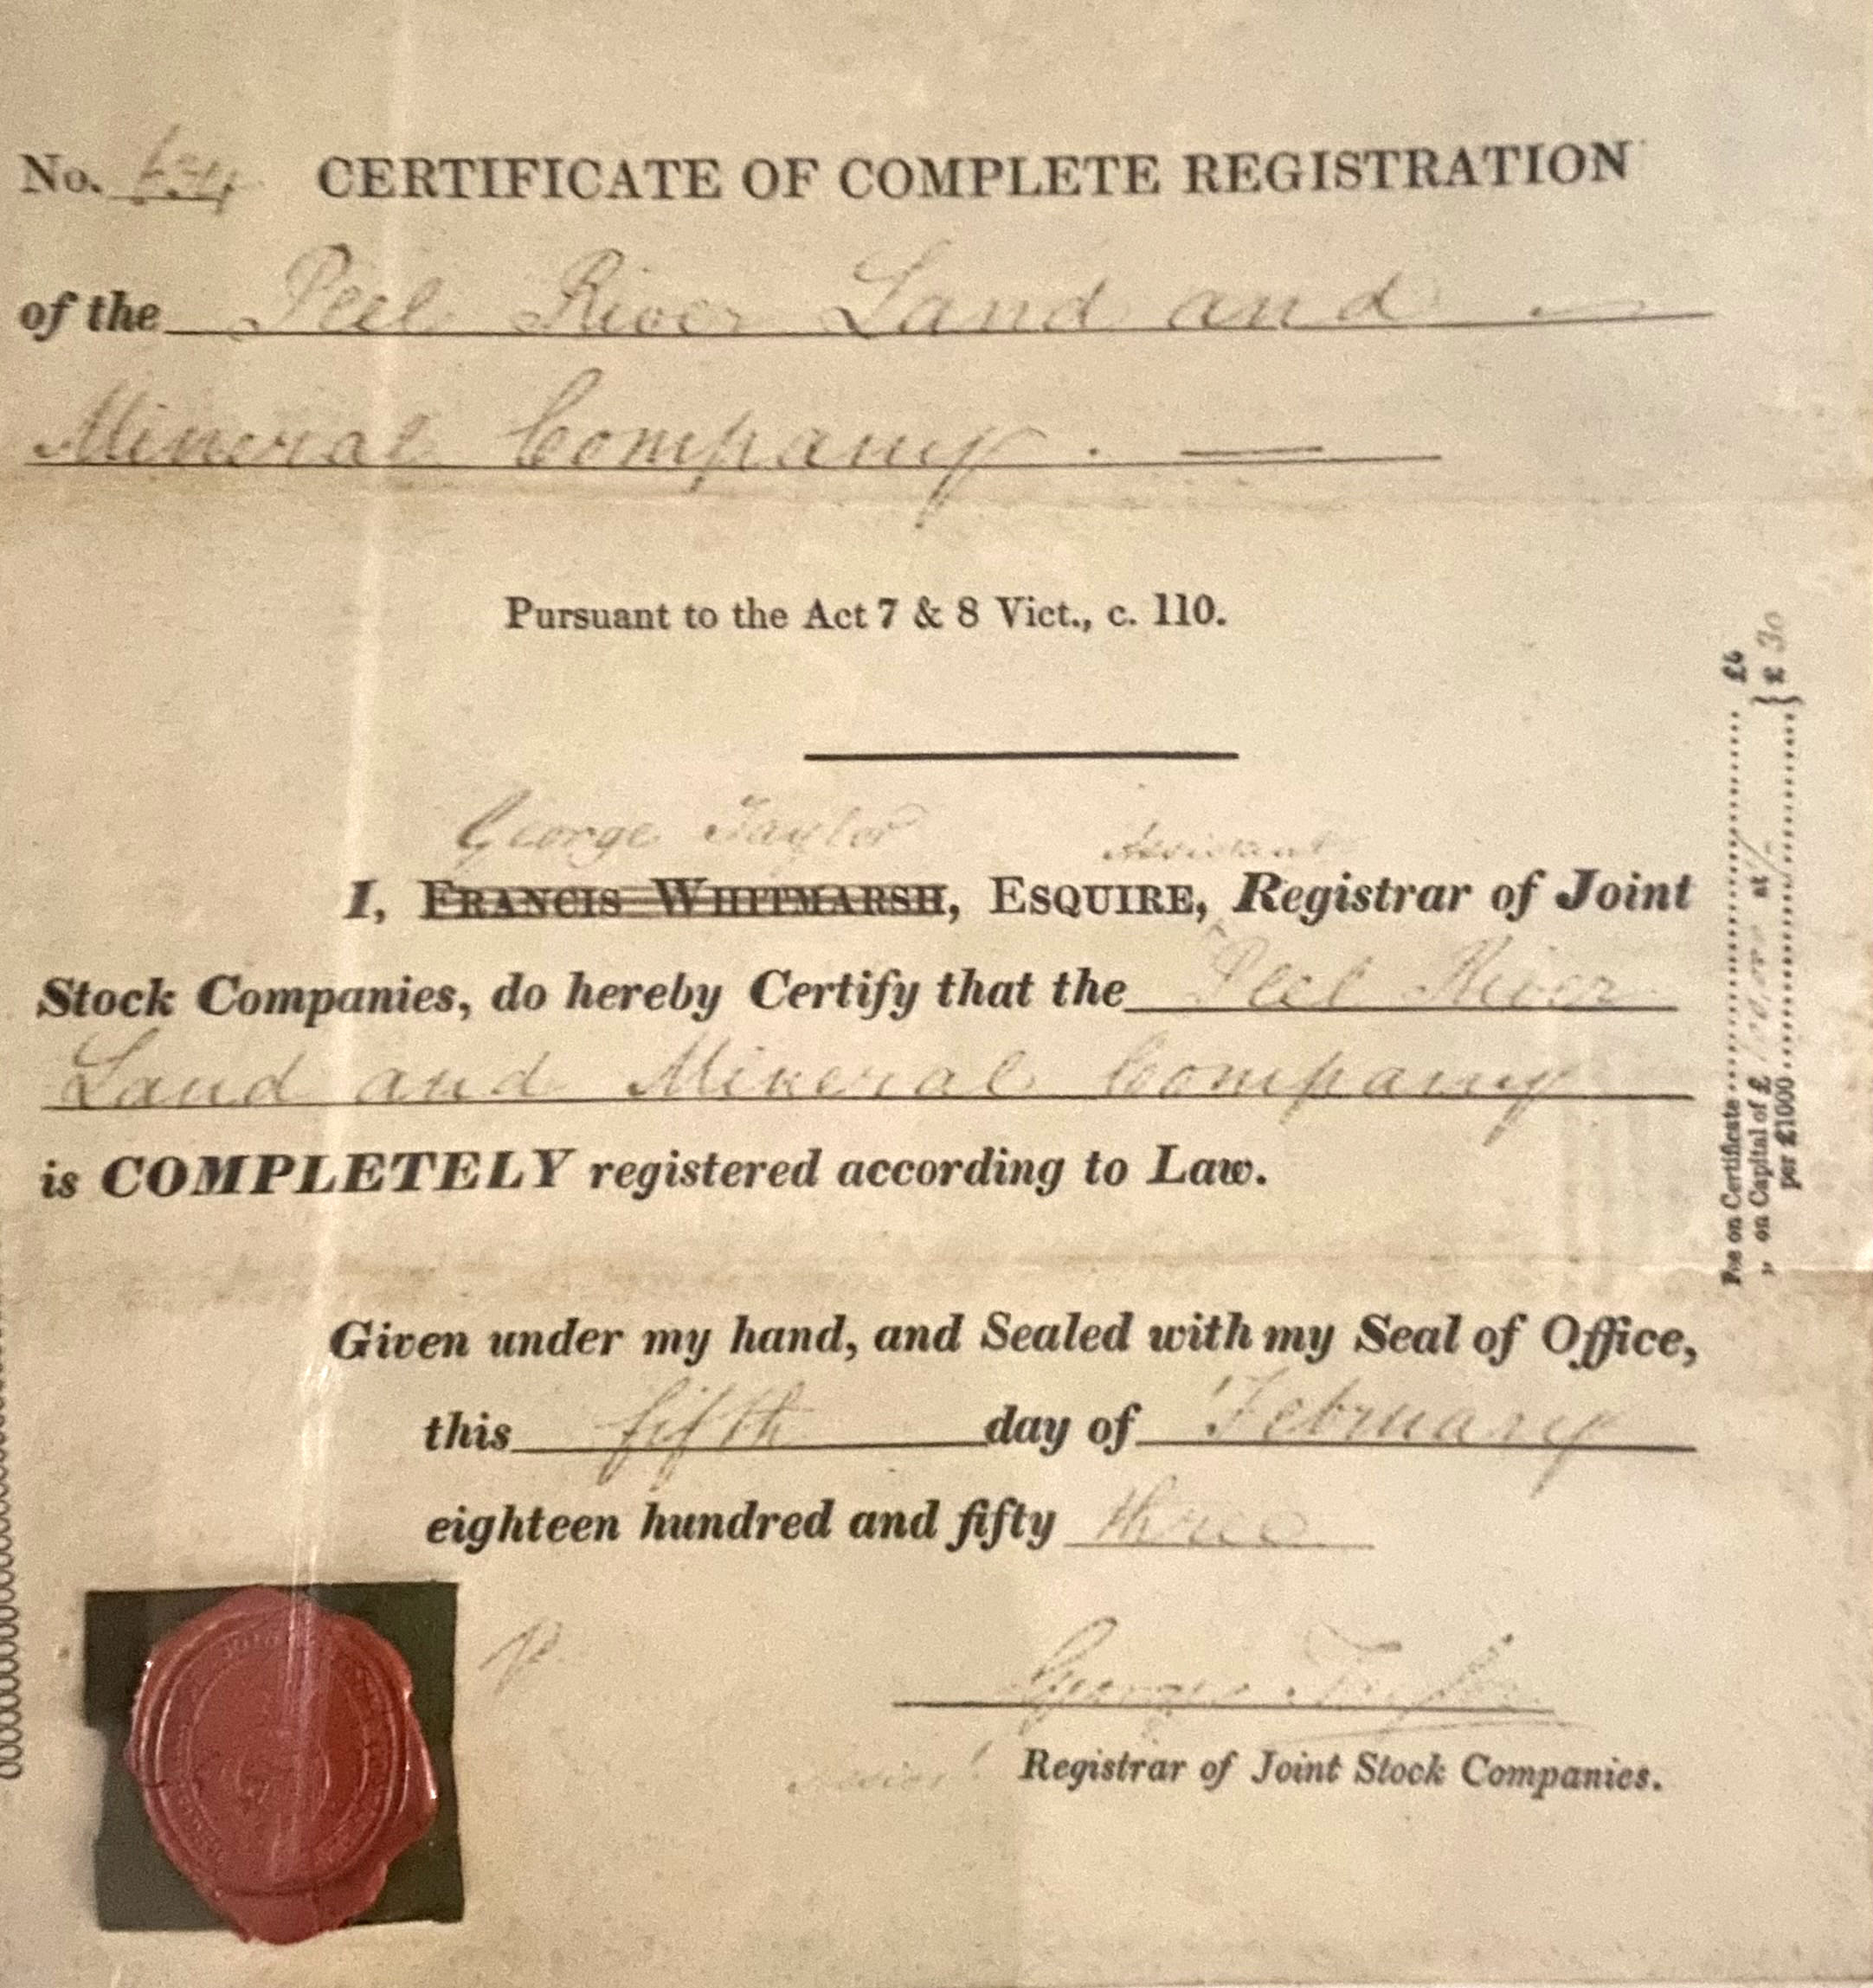 Peel River Land and Mineral Company certificate of registration, 5 February 1853 (N26).